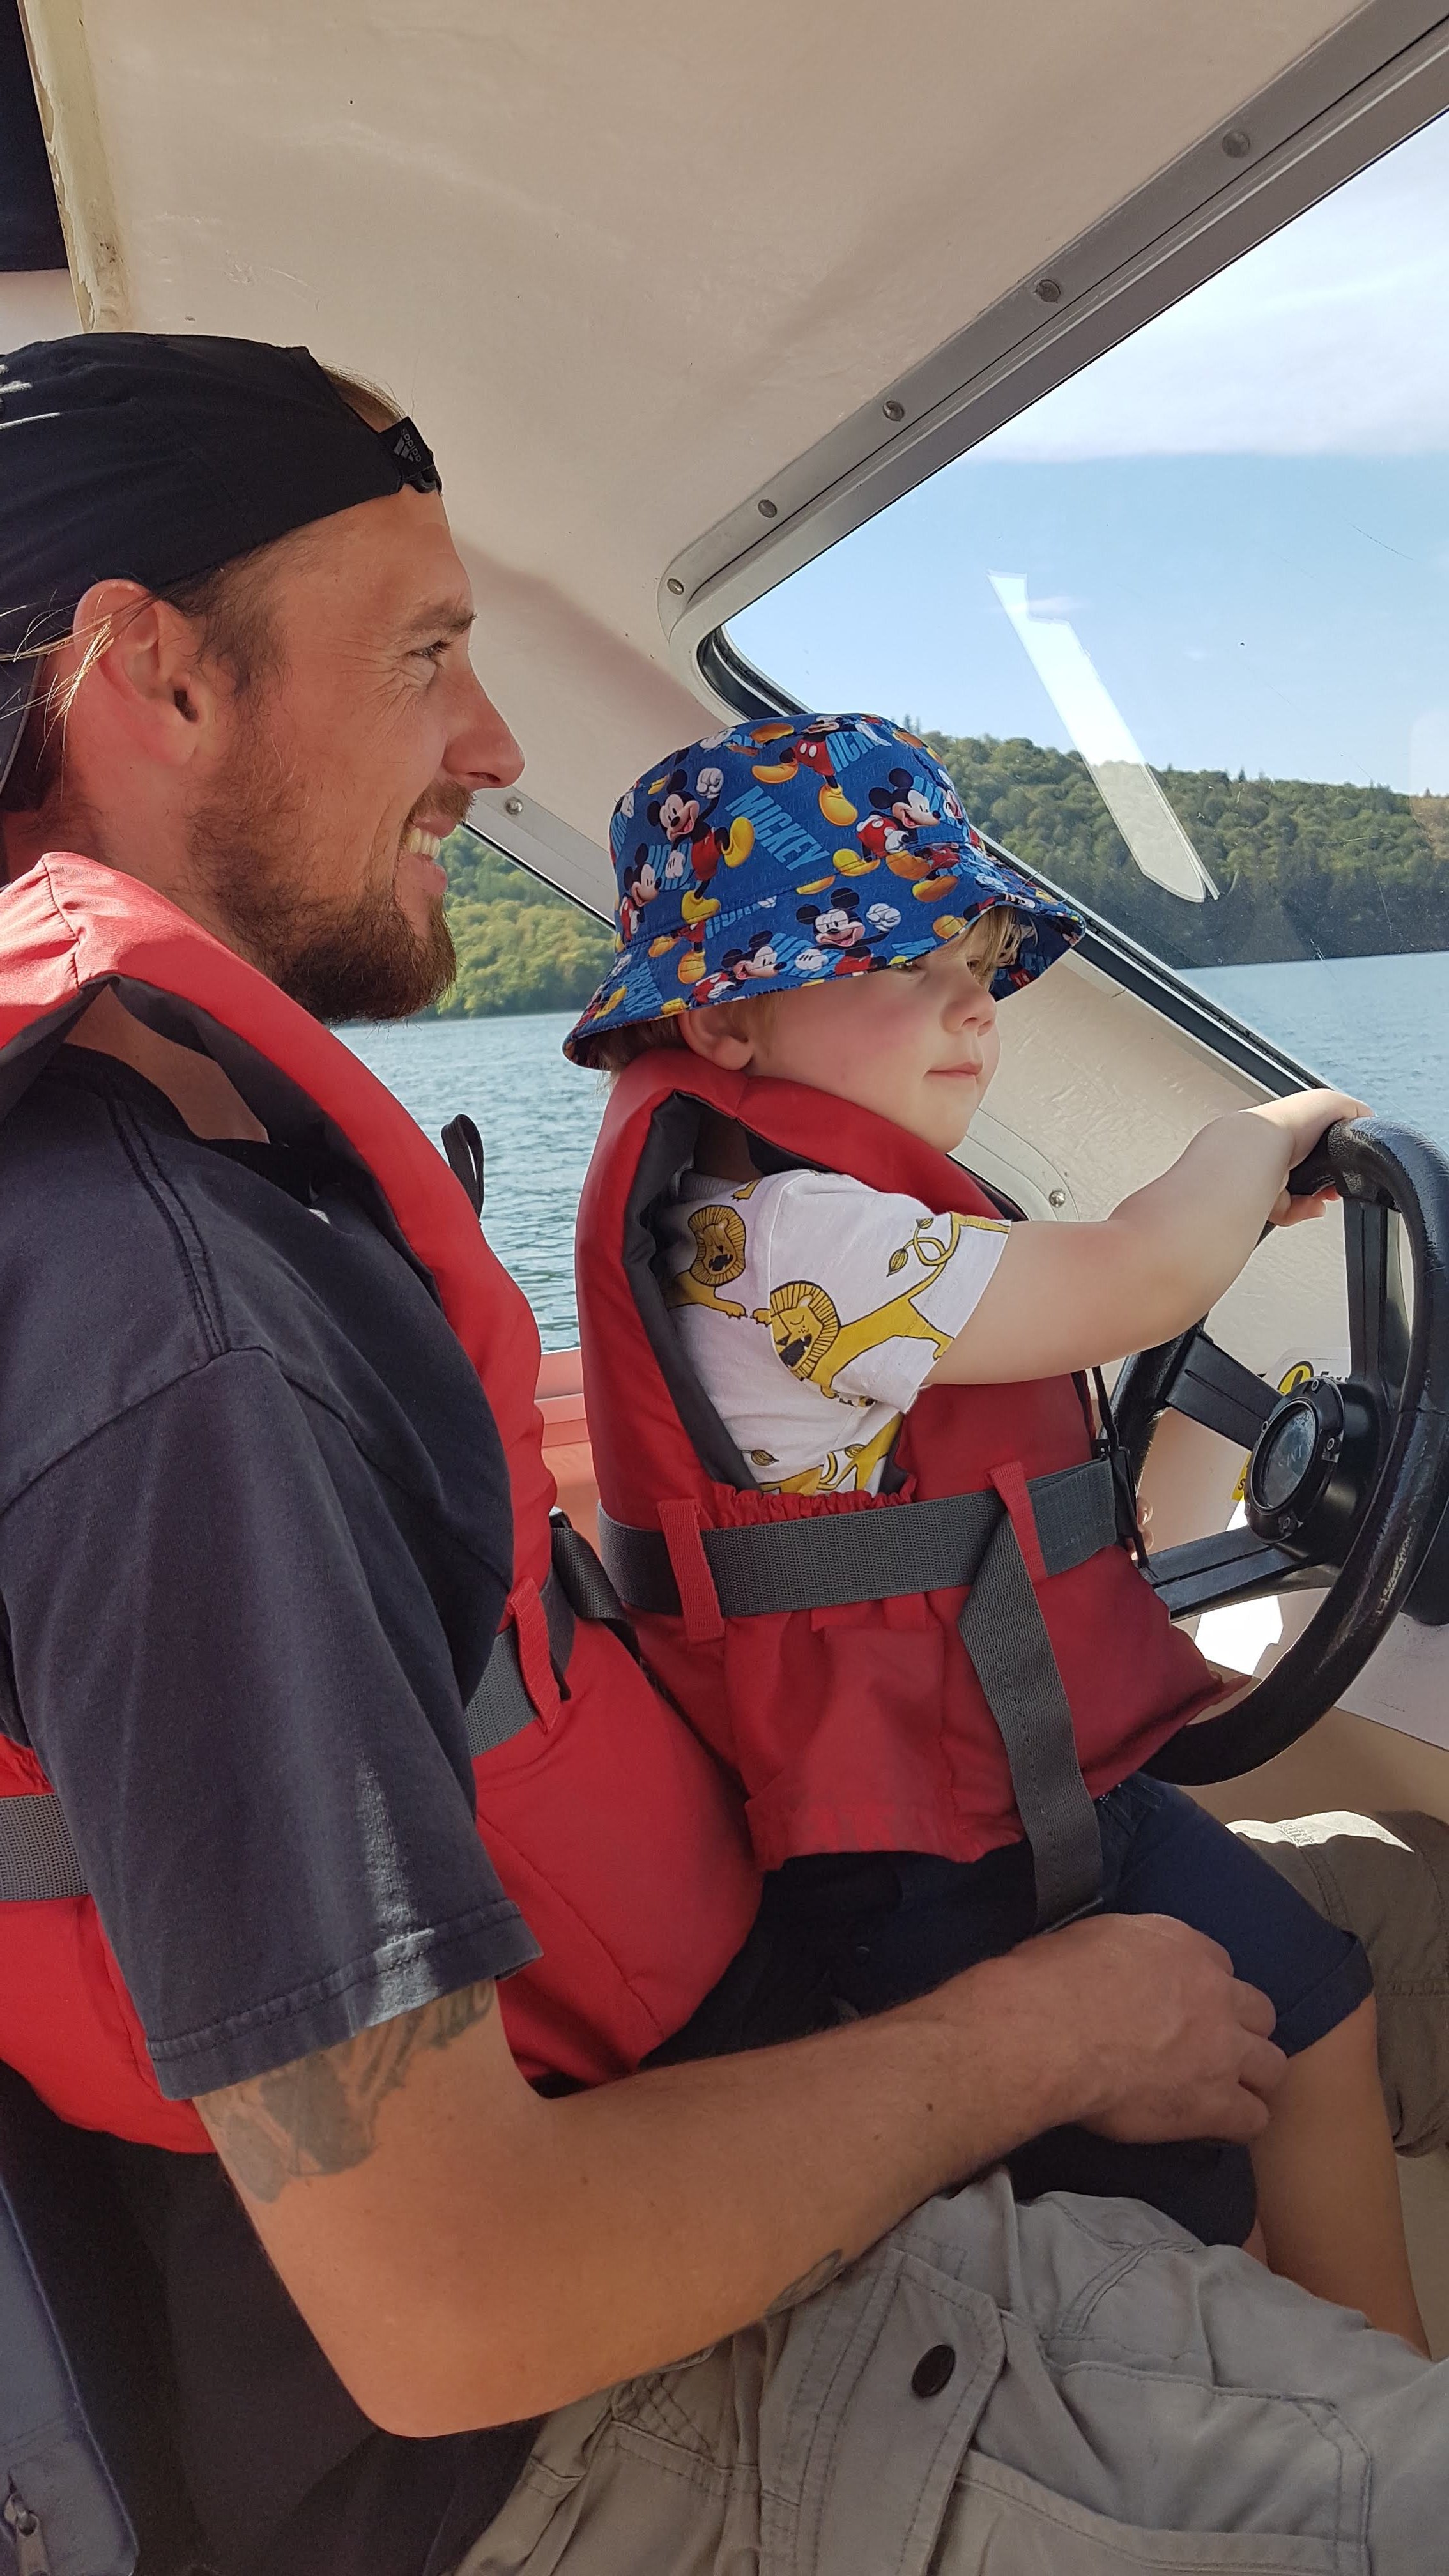 Toddler driving a boat